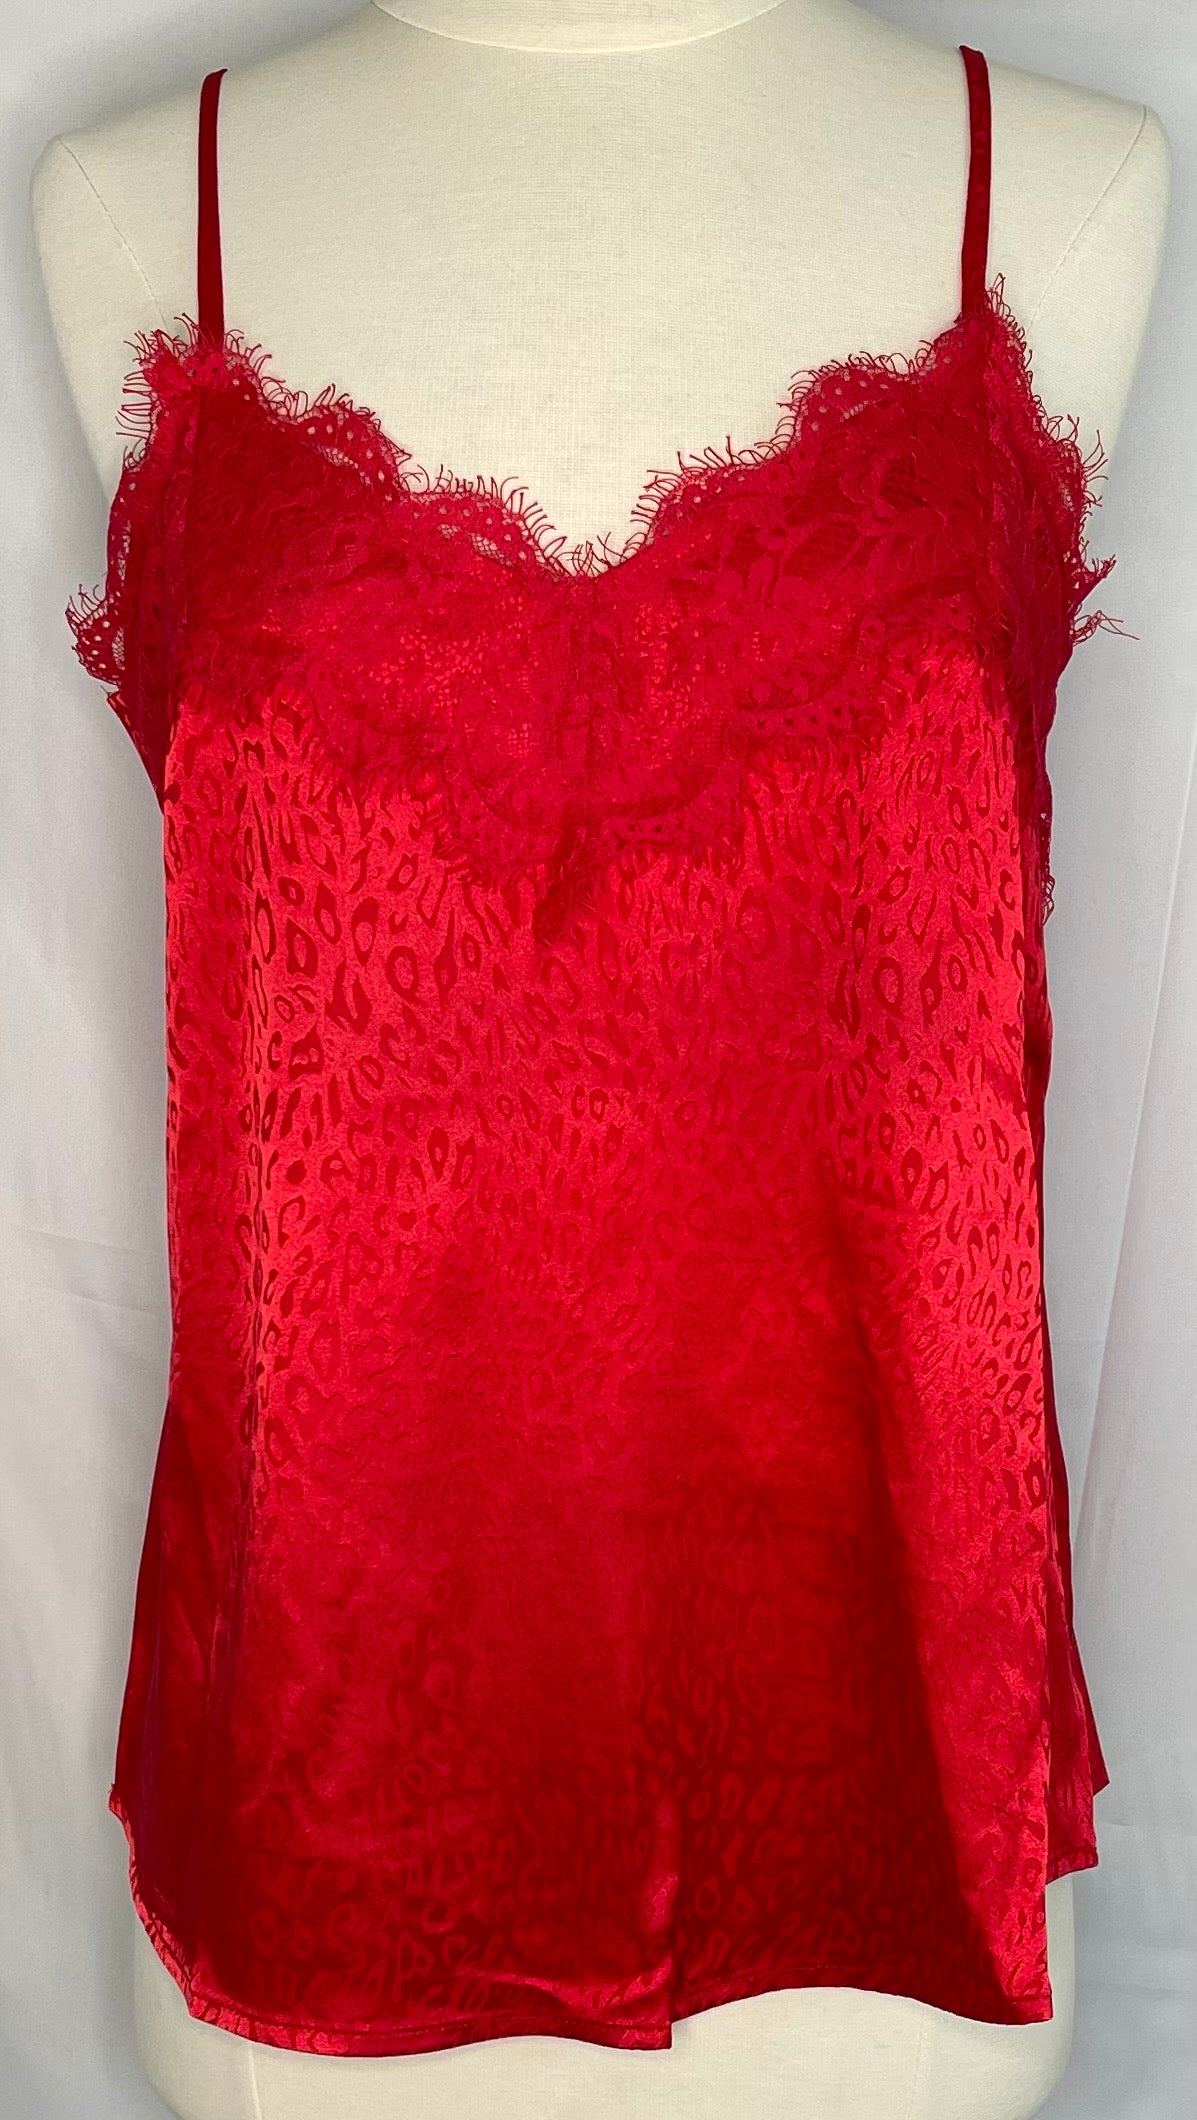 Red leopard camisole